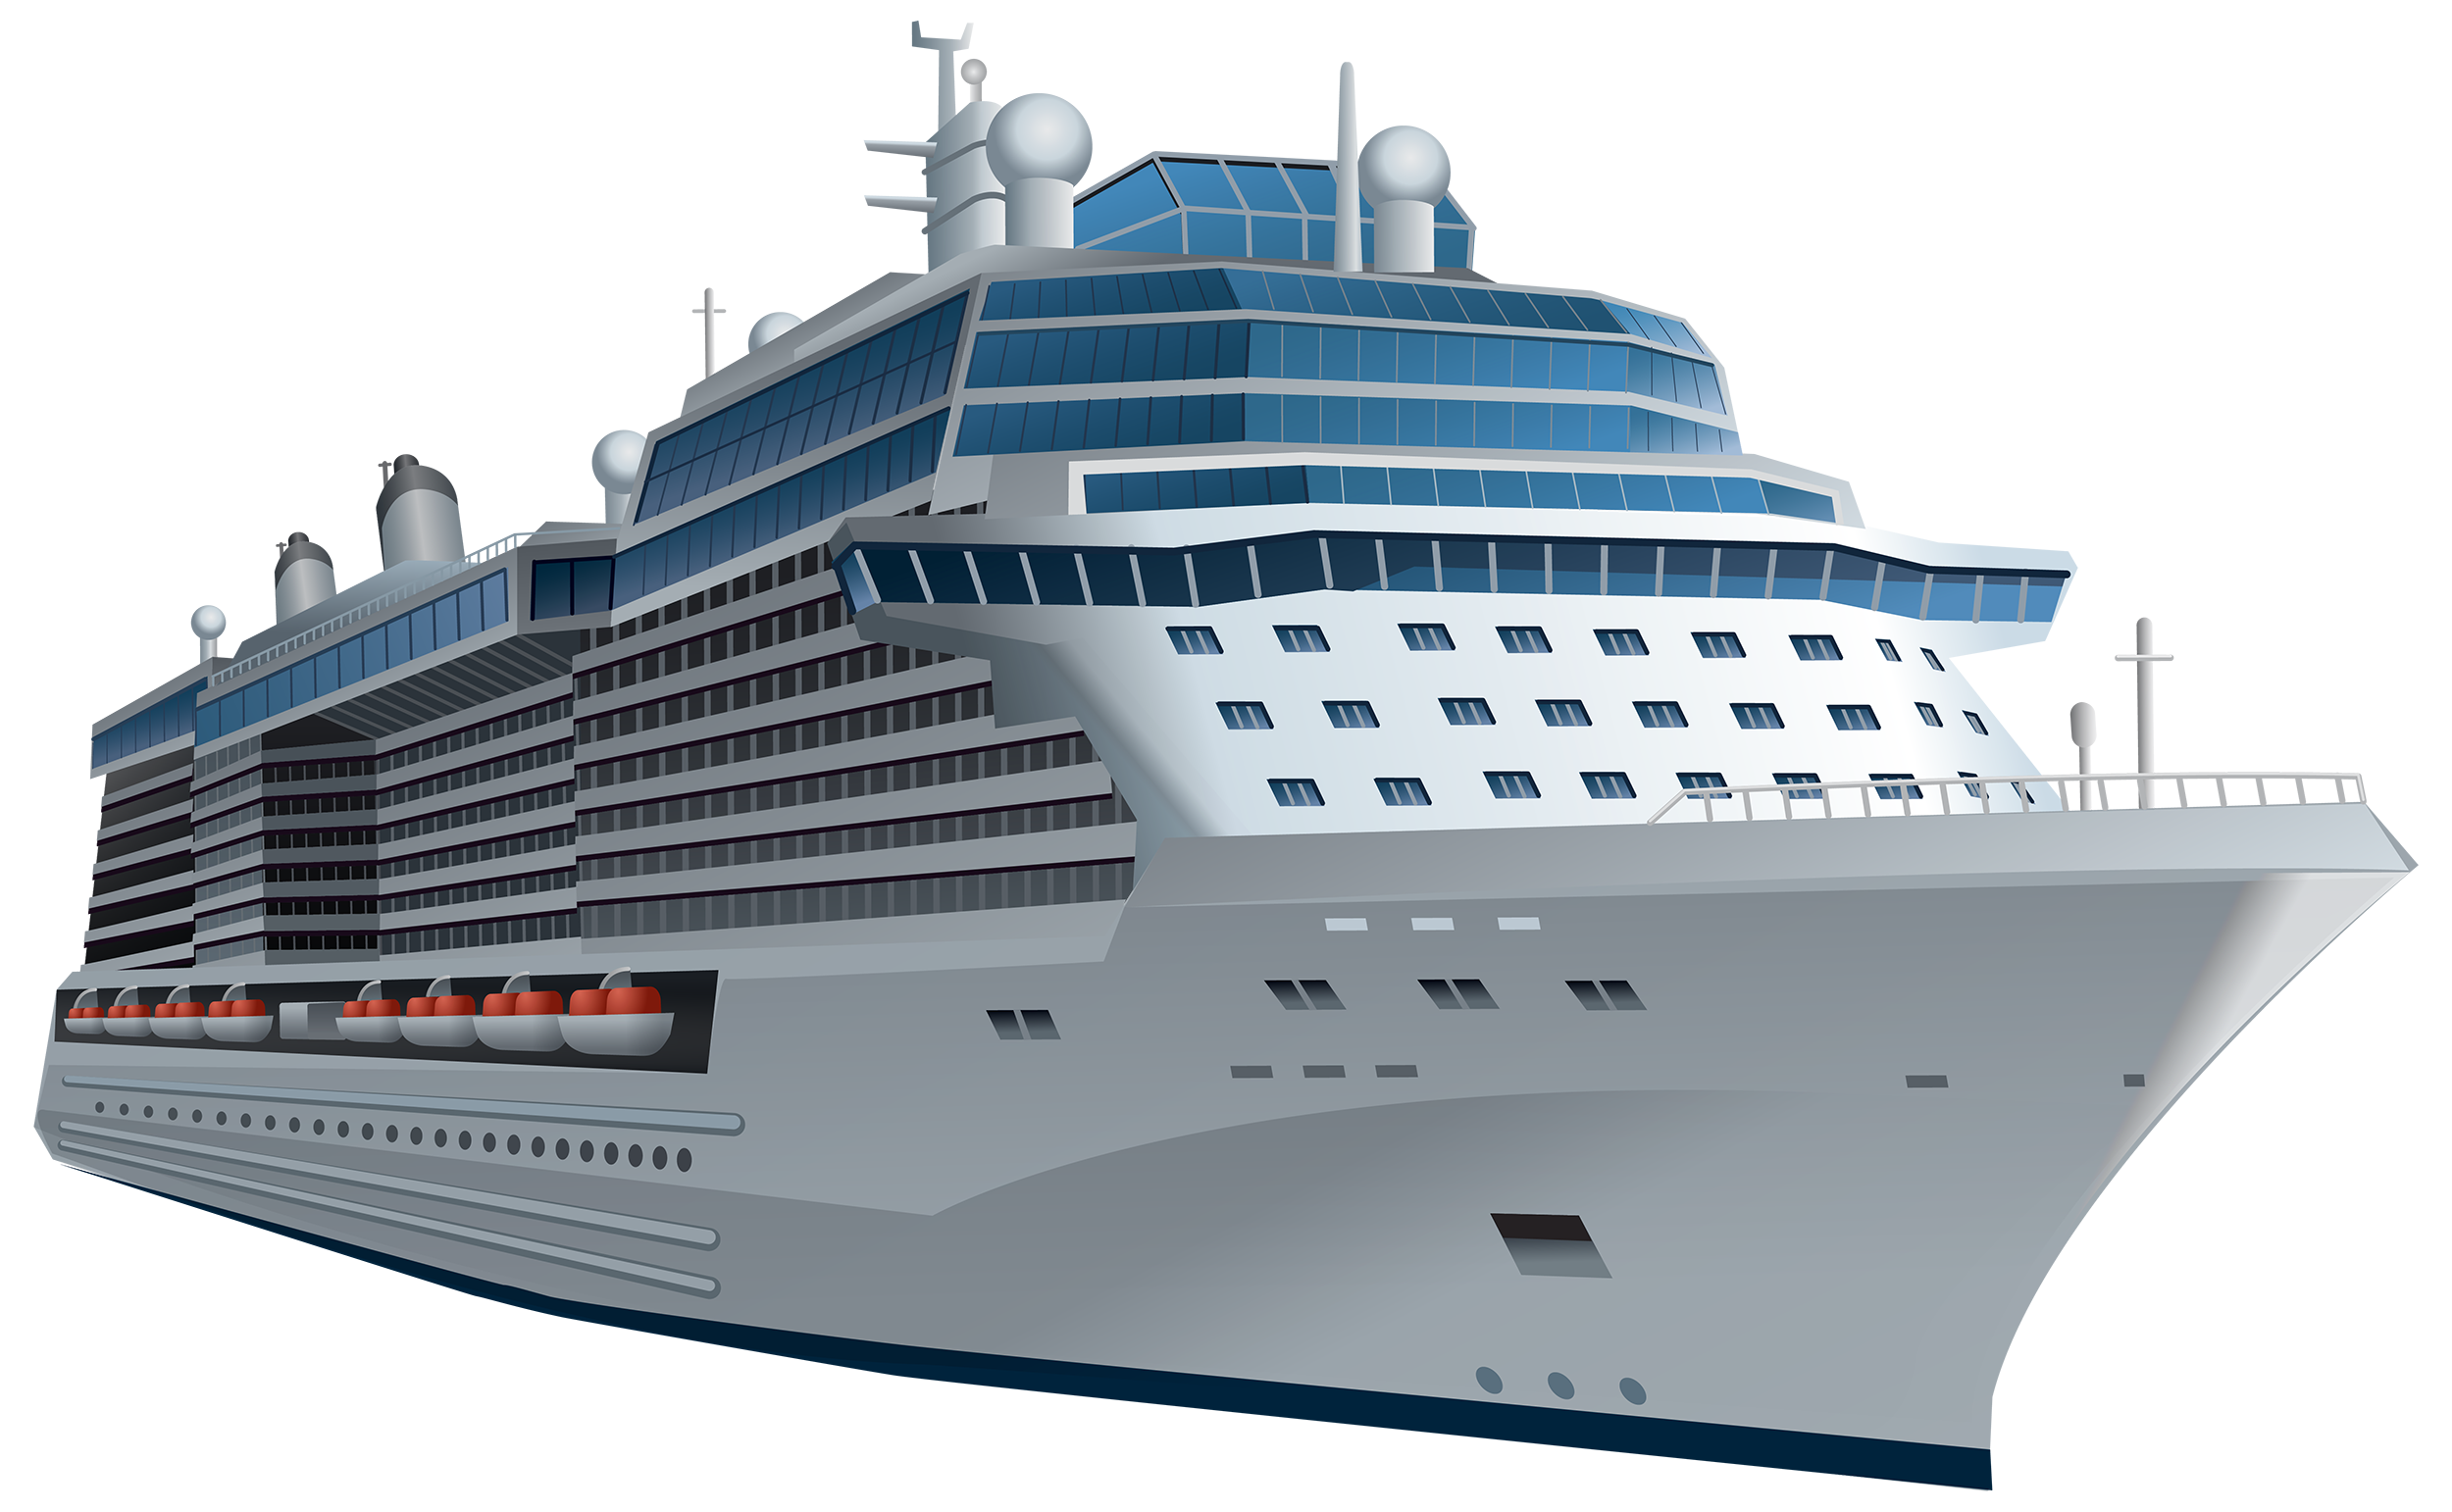 Cruise Ship PNG Picture